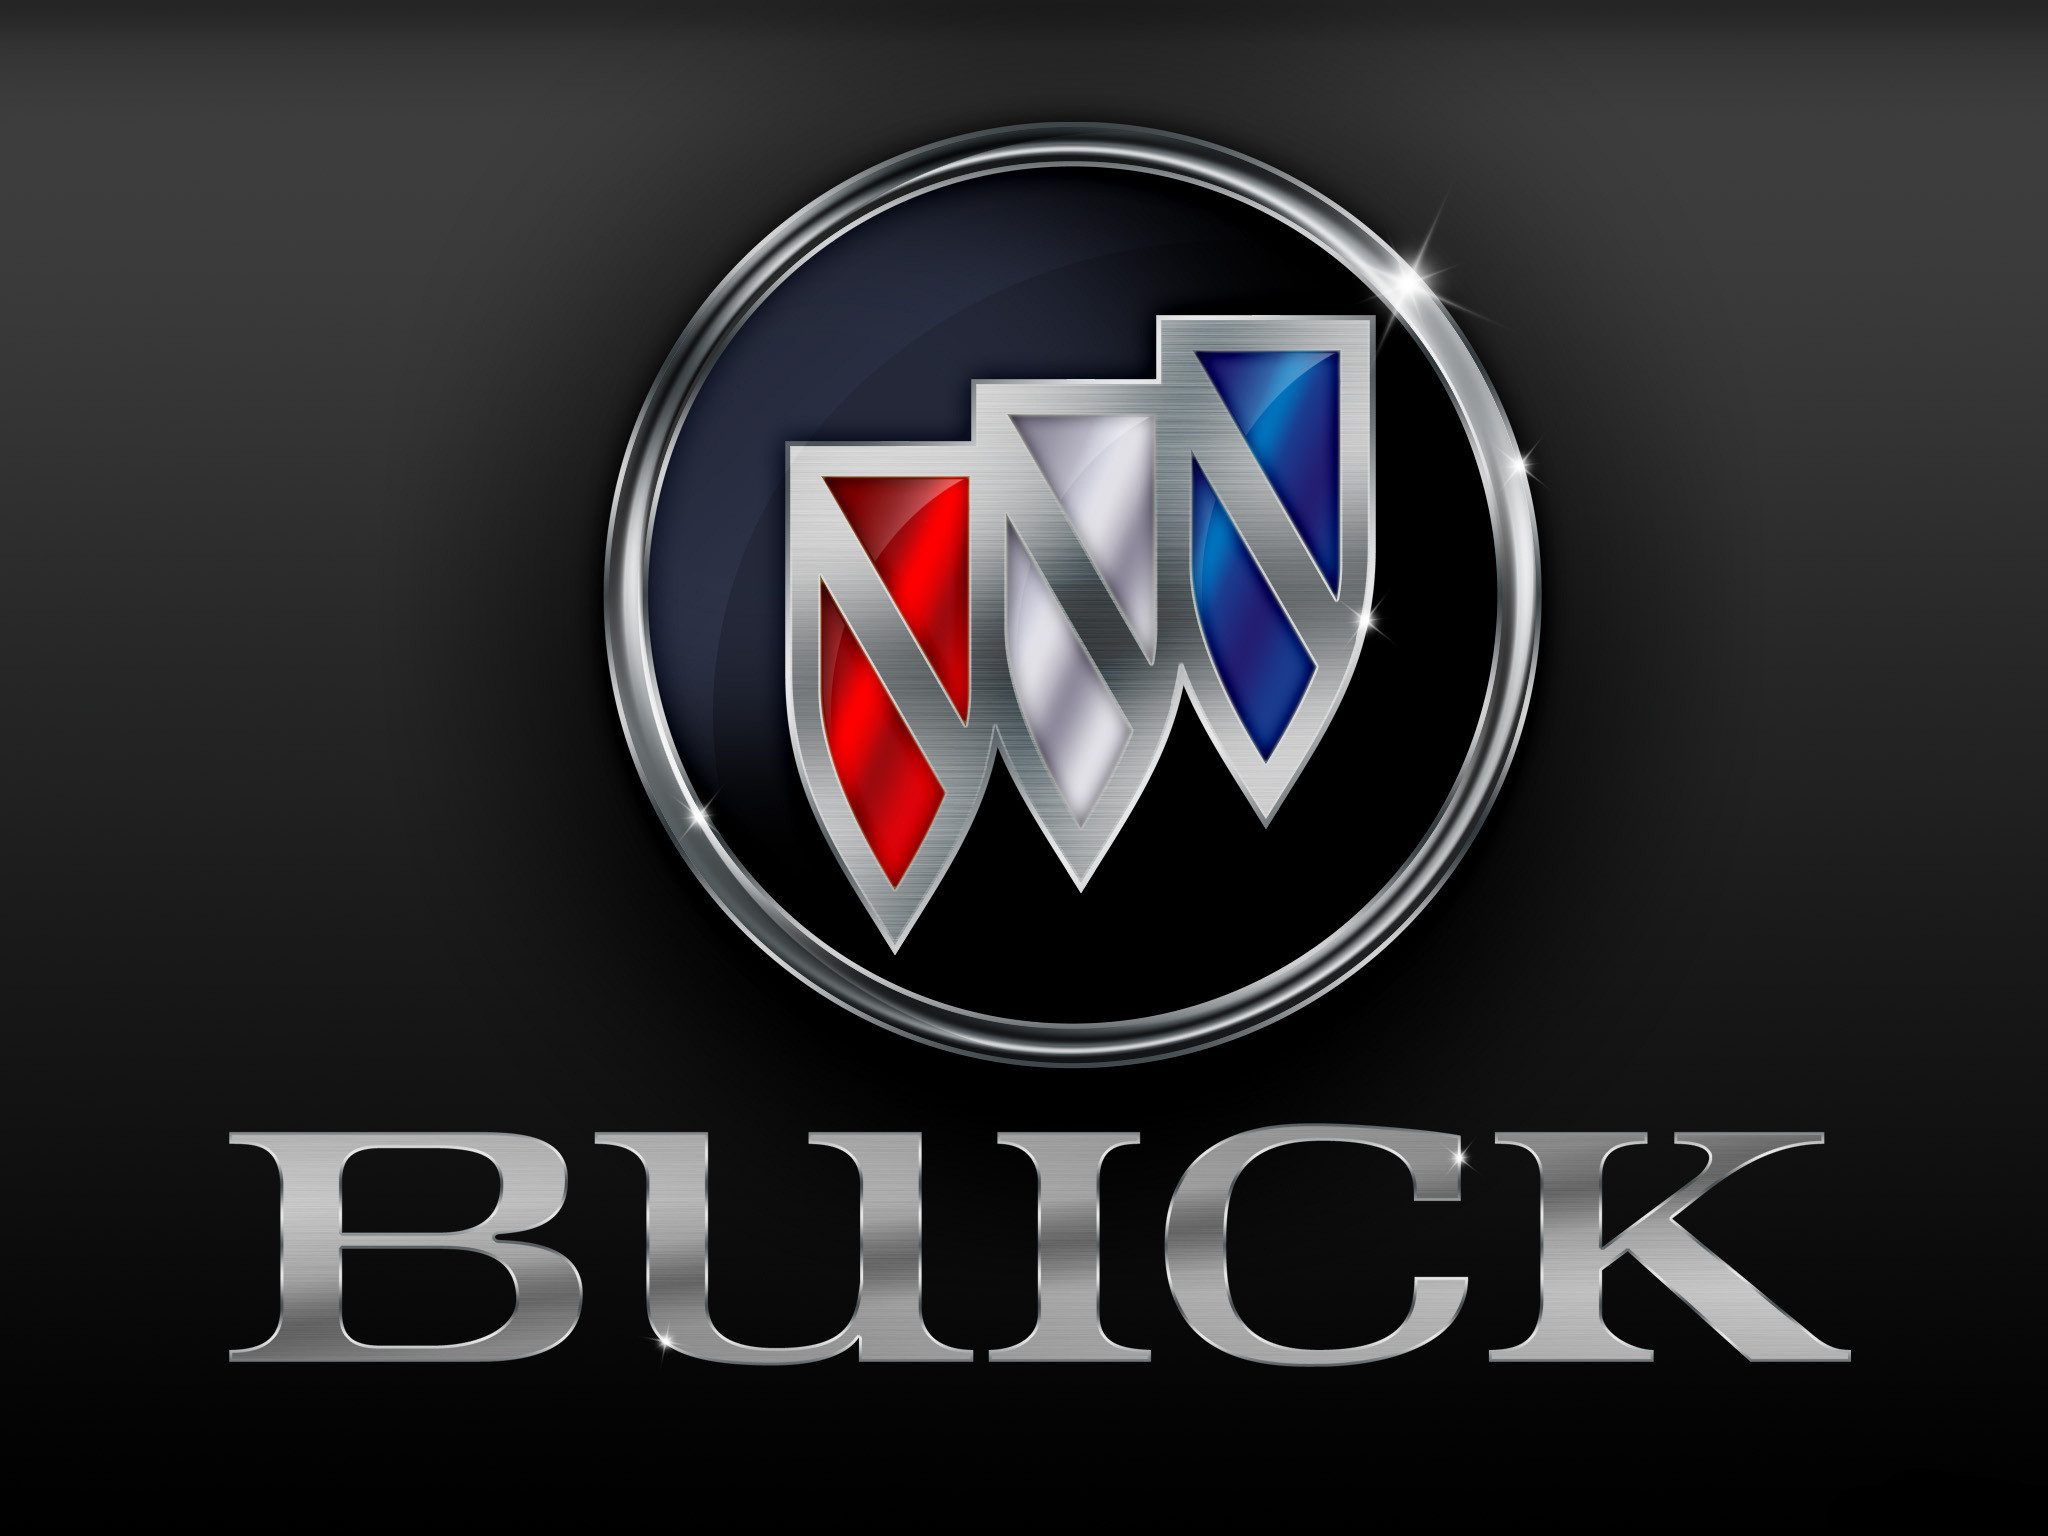 2048x1536 Buick Cool Wallpapers Of Cars - http://hdcarwallfx.com/buick-